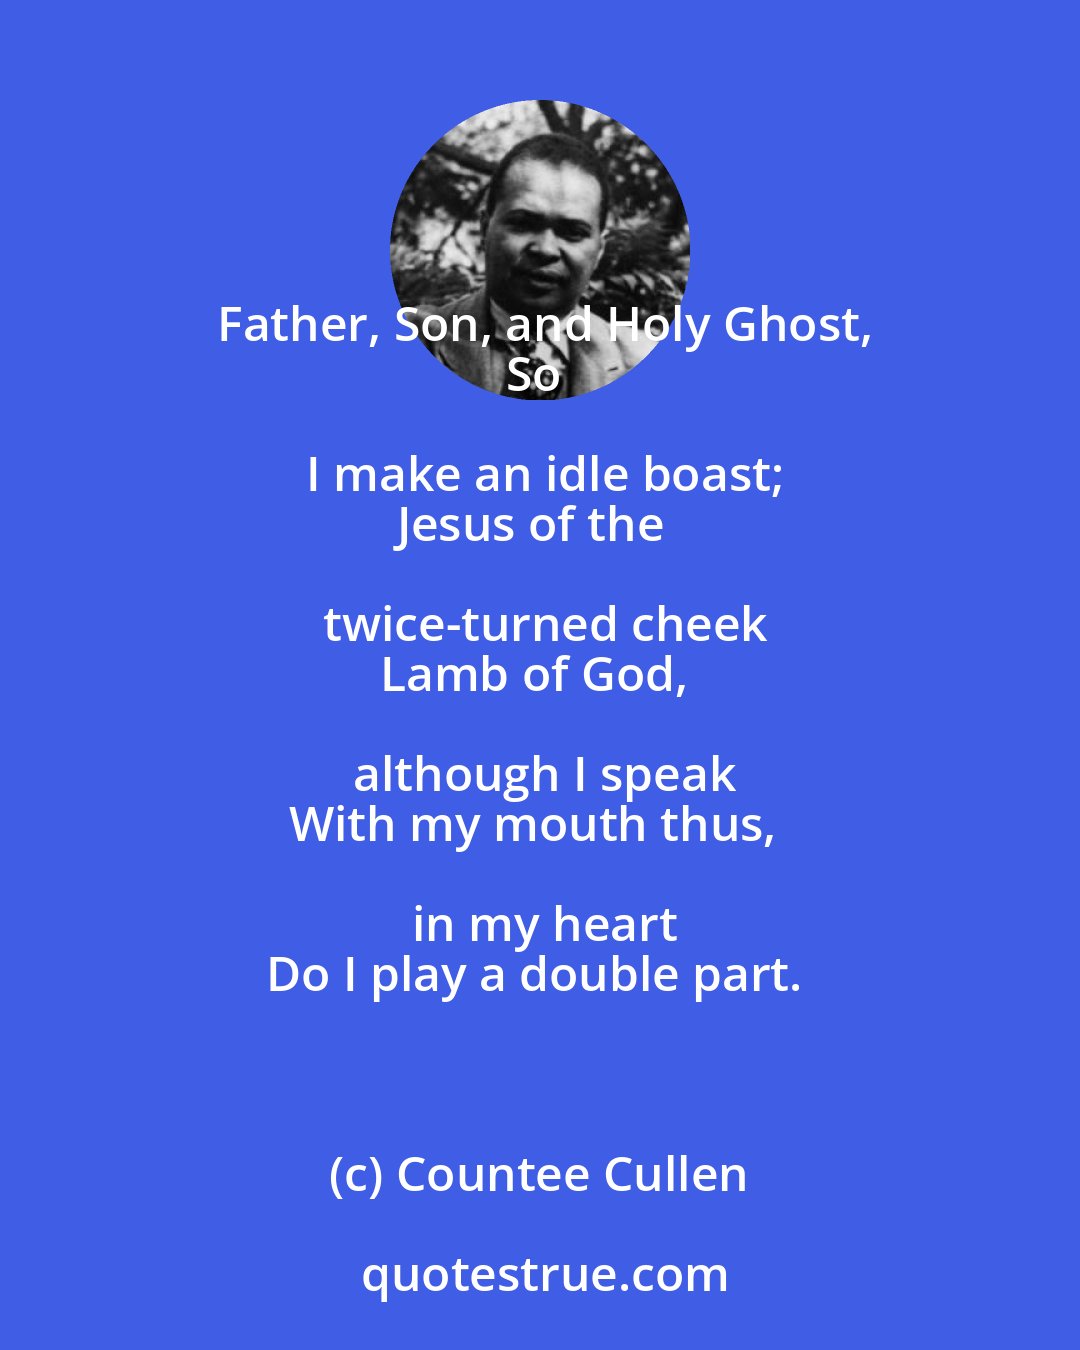 Countee Cullen: Father, Son, and Holy Ghost,
So I make an idle boast;
Jesus of the twice-turned cheek
Lamb of God, although I speak
With my mouth thus, in my heart
Do I play a double part.